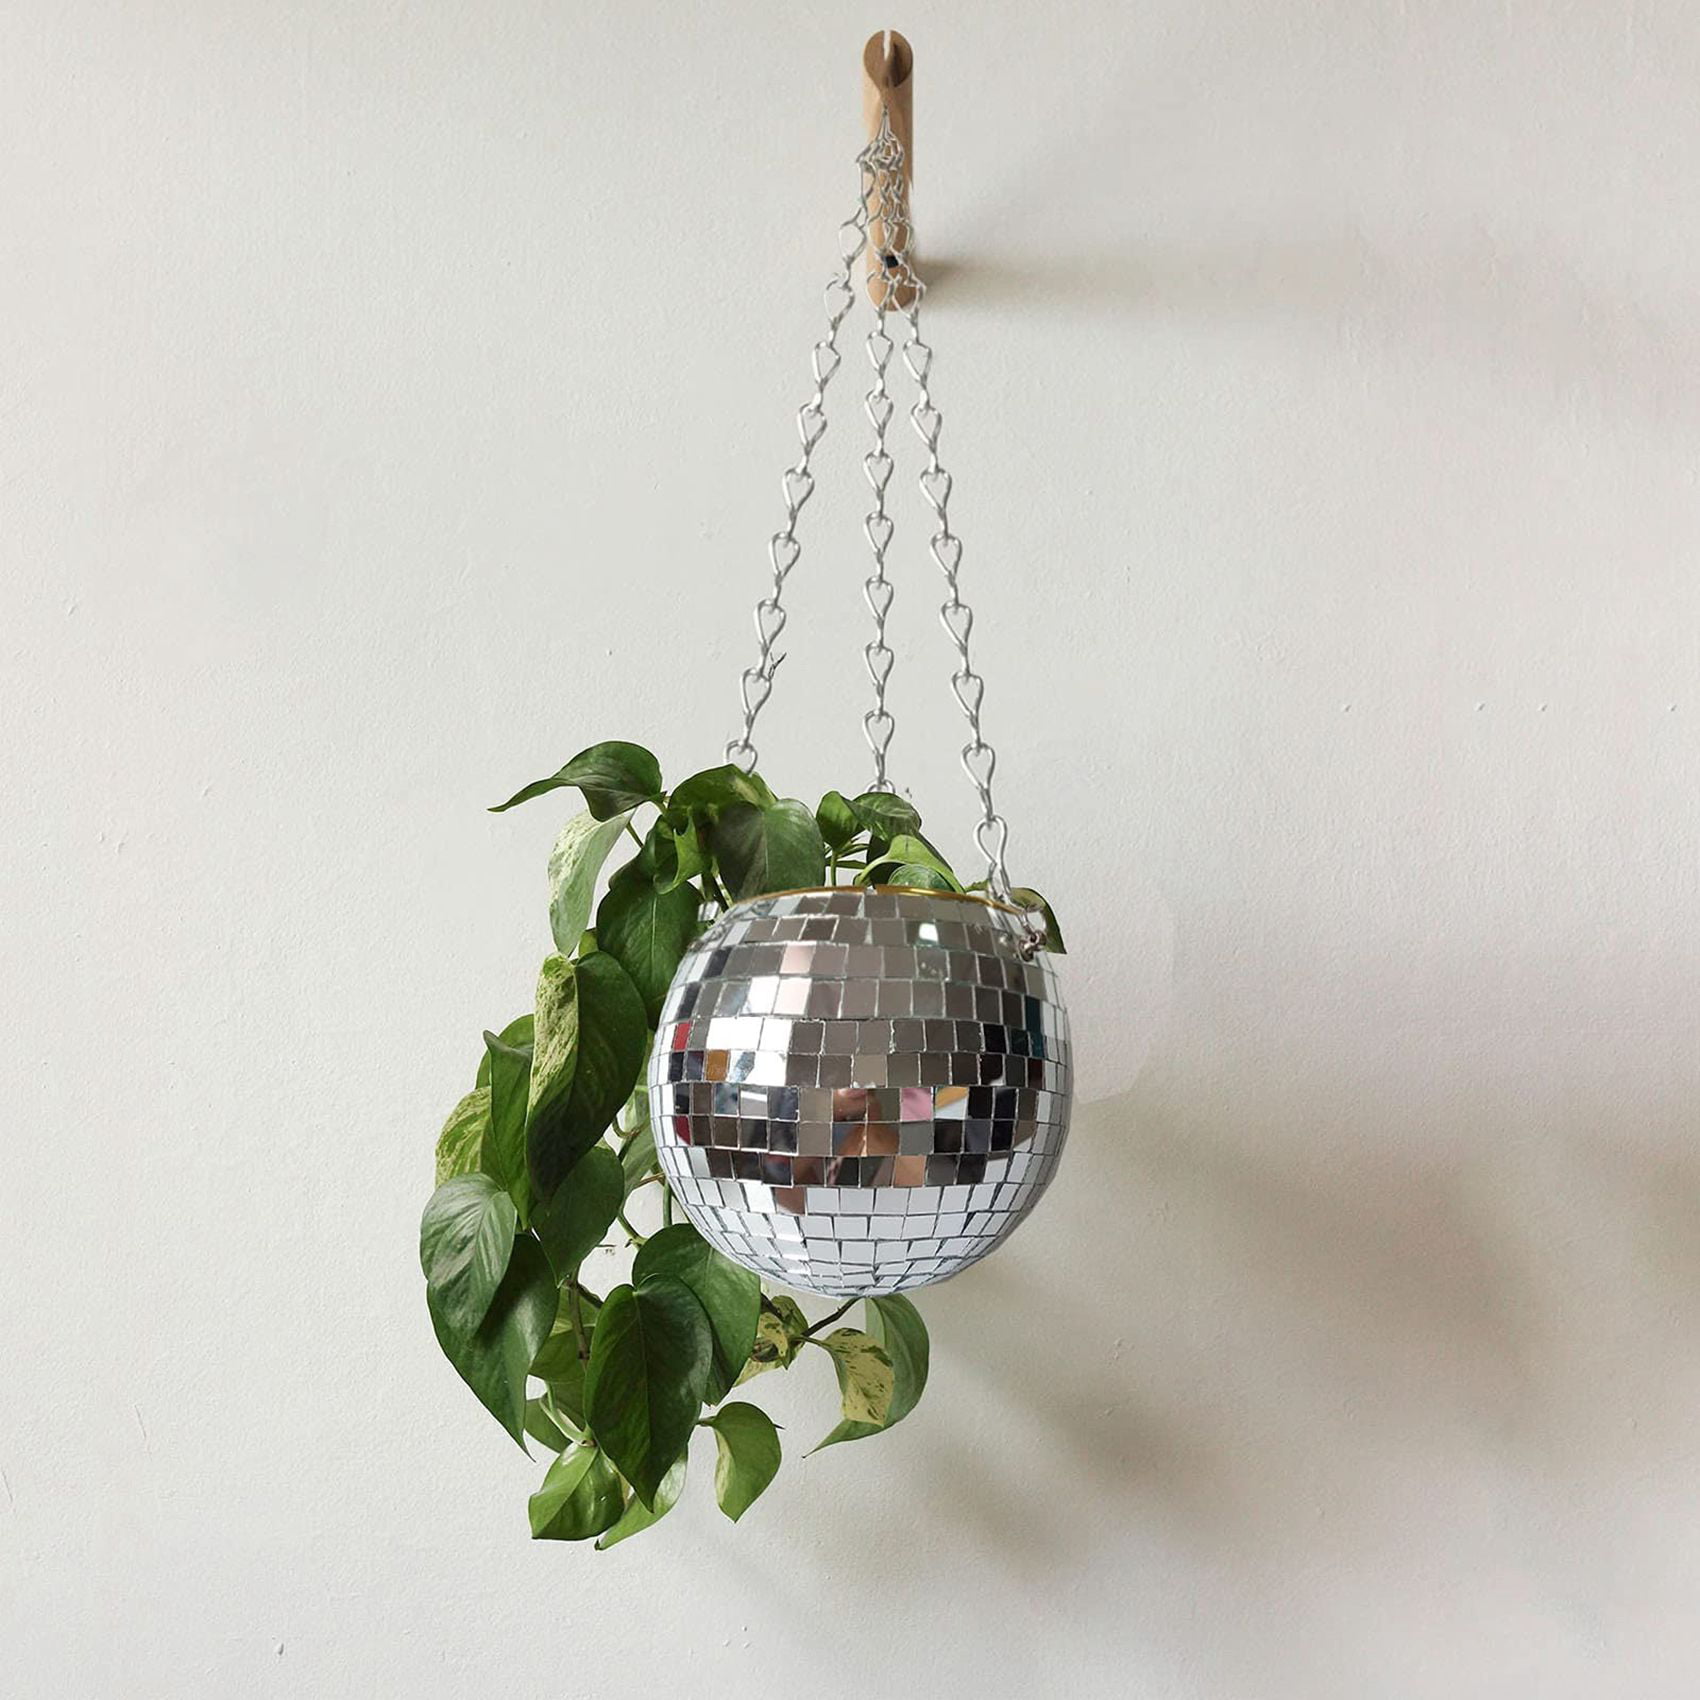 Disco Planter-Hanging Disco Planter-Hanging Wall Planter-Mirror Ball Planter-Disco Light Planter-Hanging Plant Stand-Housewarming Gifts